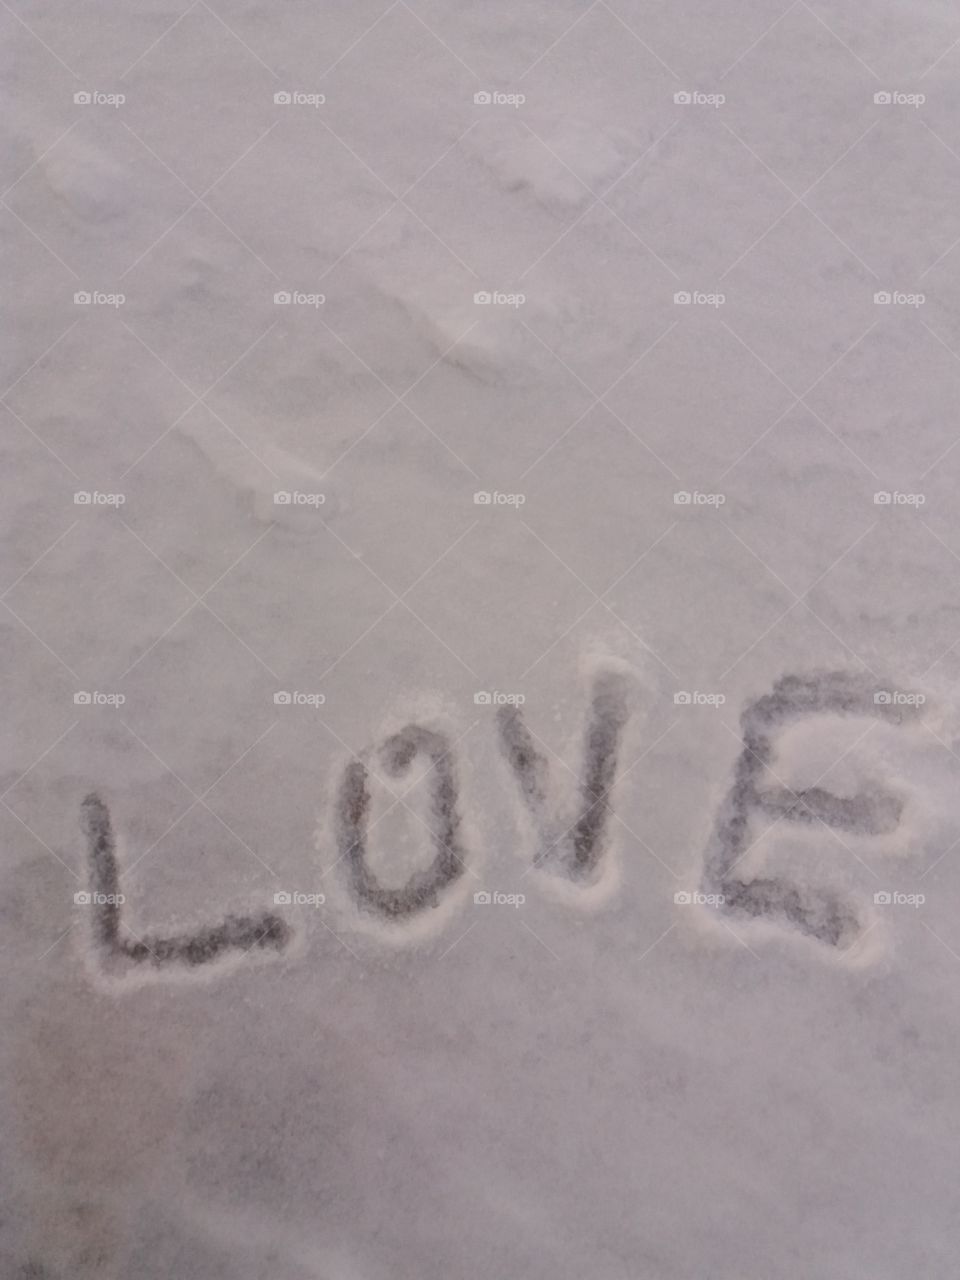 Writing Love in the snow